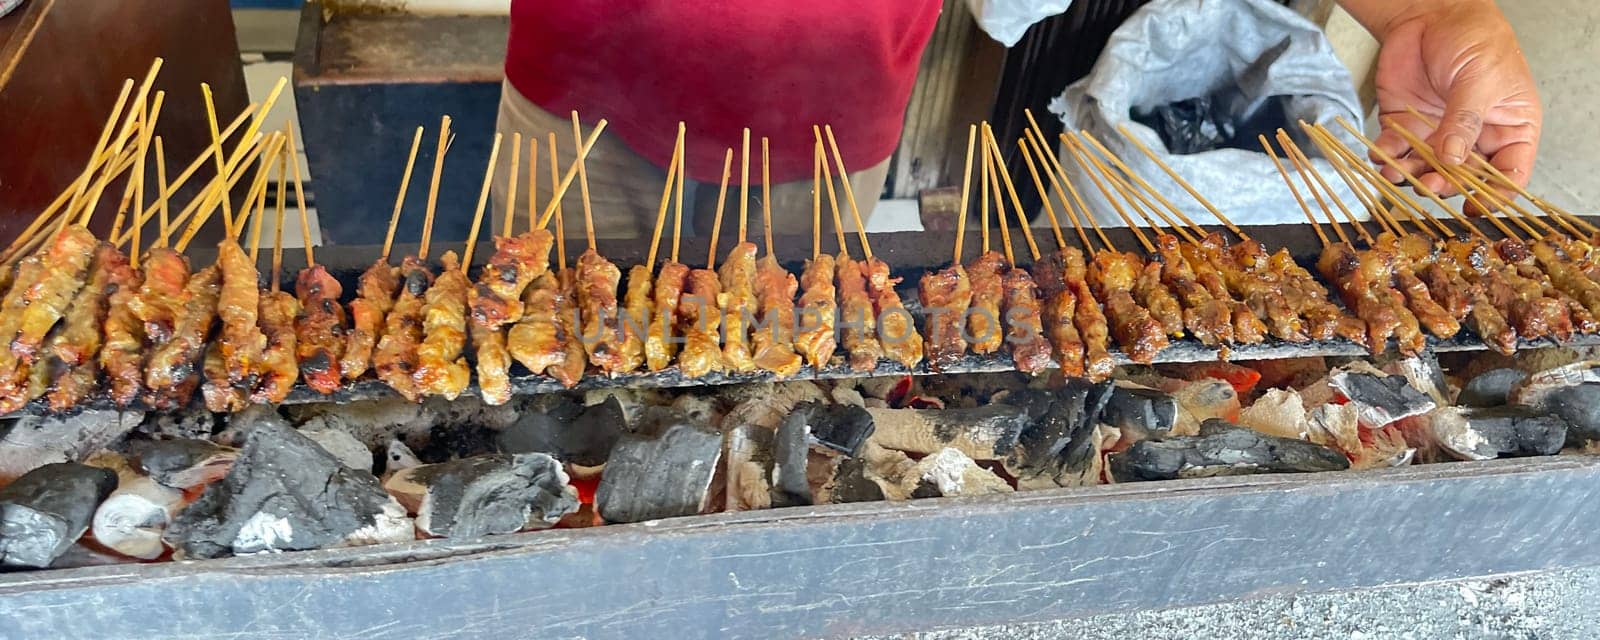 very flavorful beef satay meat grilled over charcoal, beef skewer delicious barbeque, sate sapi